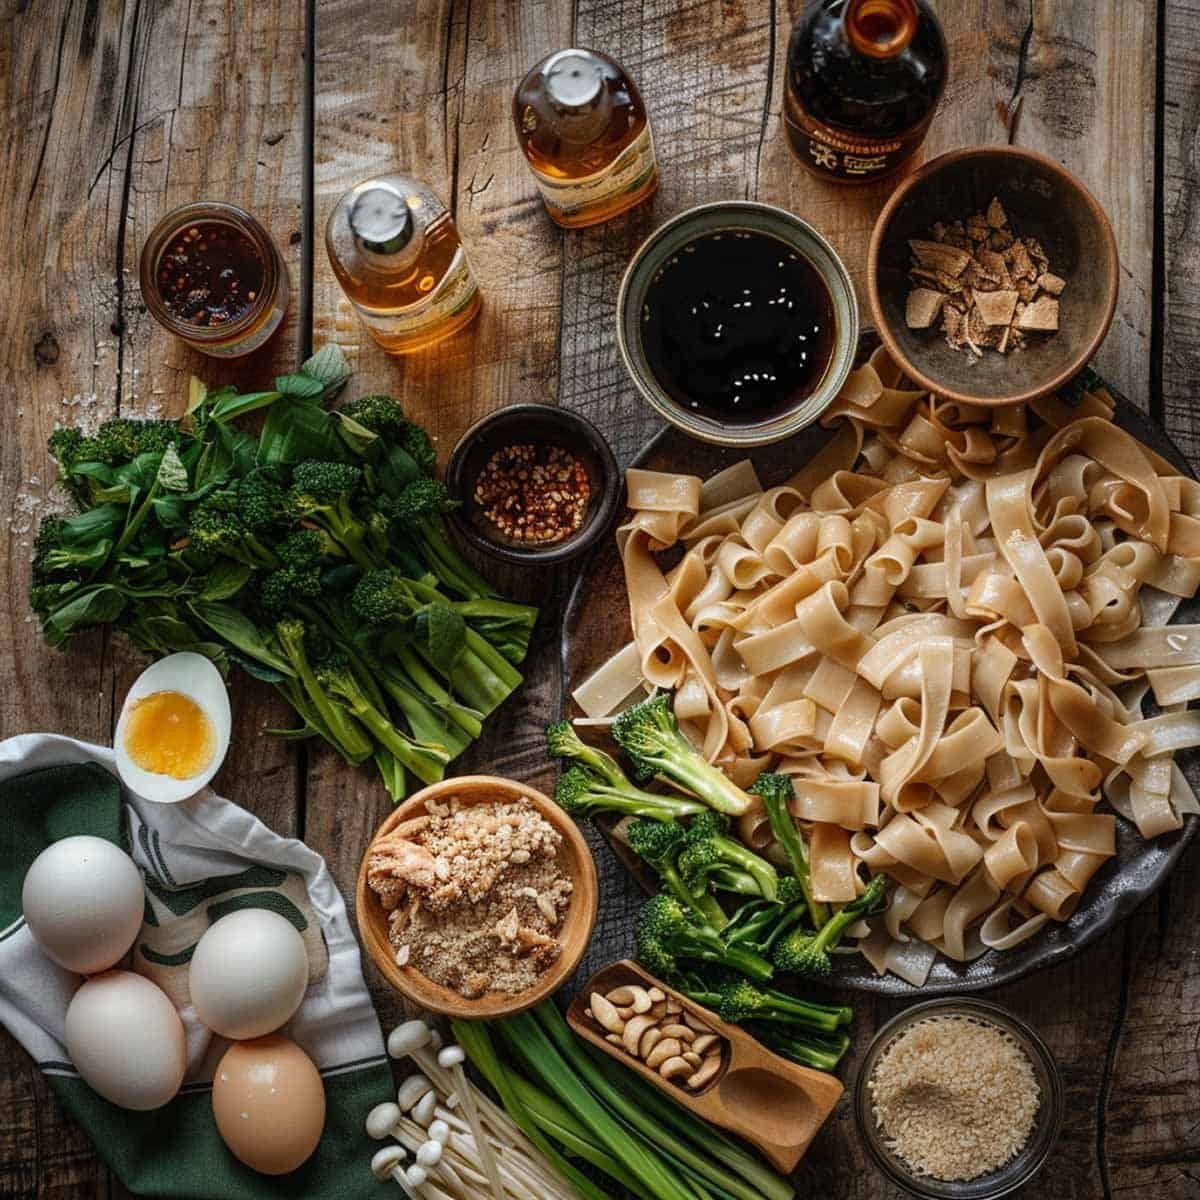 Wide rice noodles surrounded by essential ingredients for Pad See Ew Thai stir fry noodle